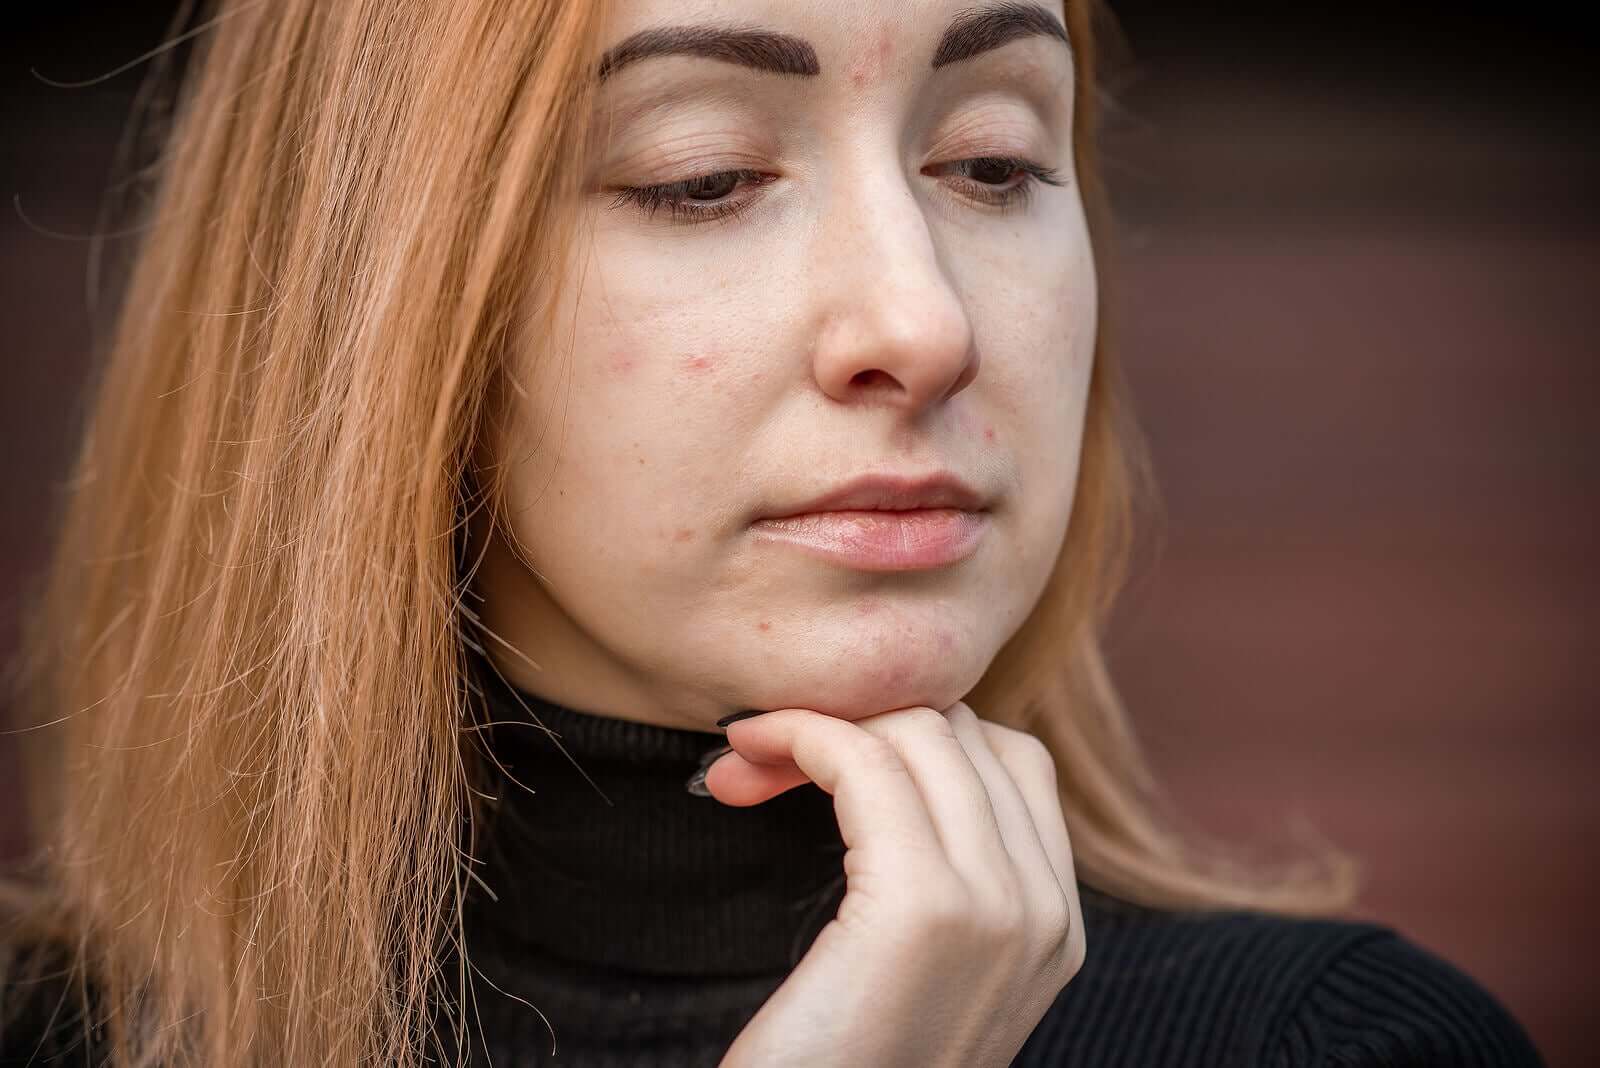 Teenage Acne: Types and Causes